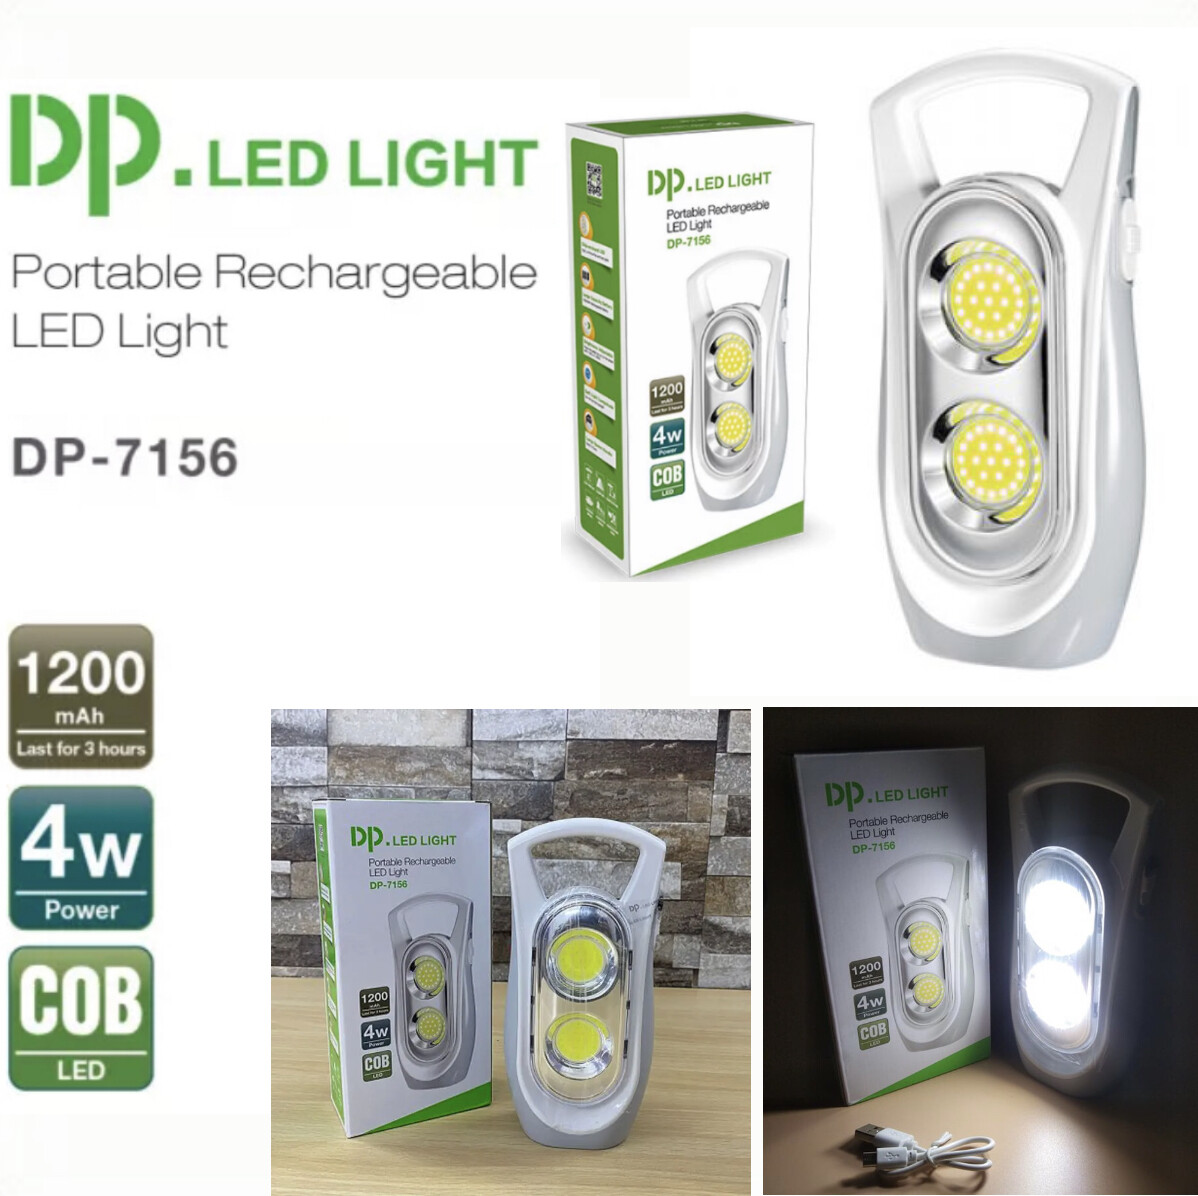 Rechargeable Lamp (DP-7156)